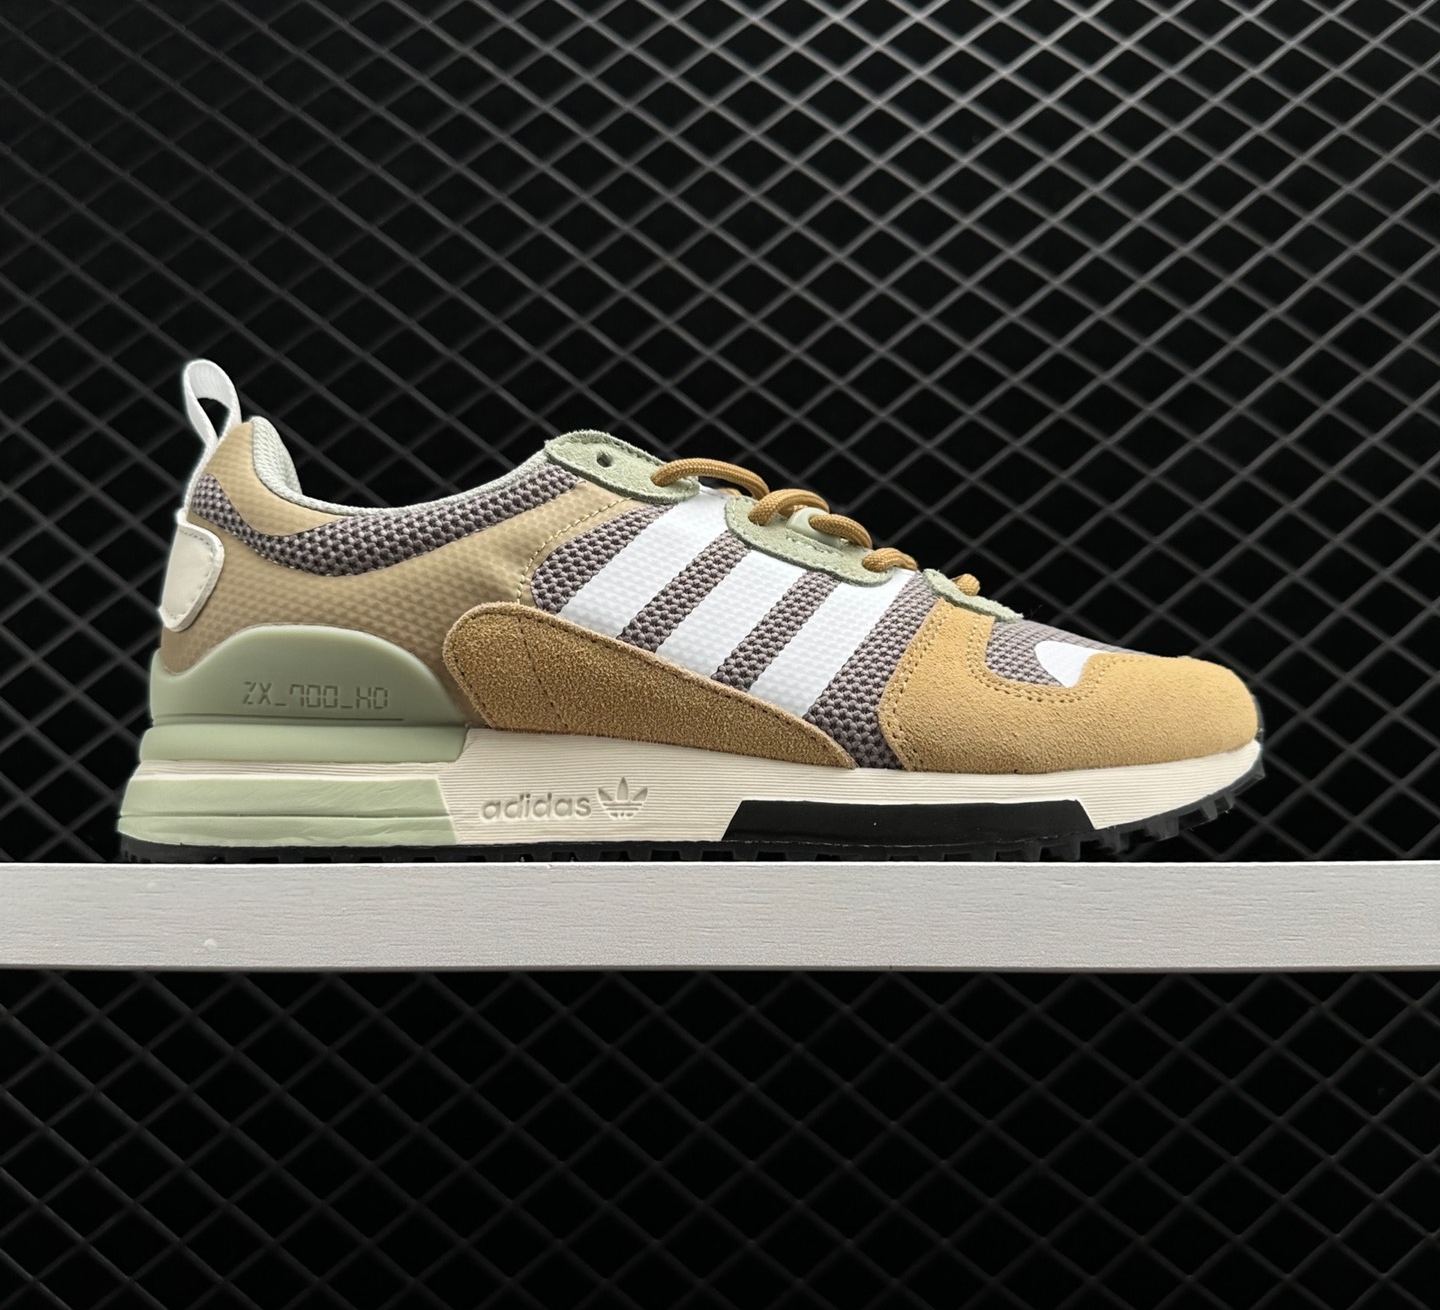 Adidas ZX 700 HD Shoes - Beige/Off White/Feather Grey - H01849